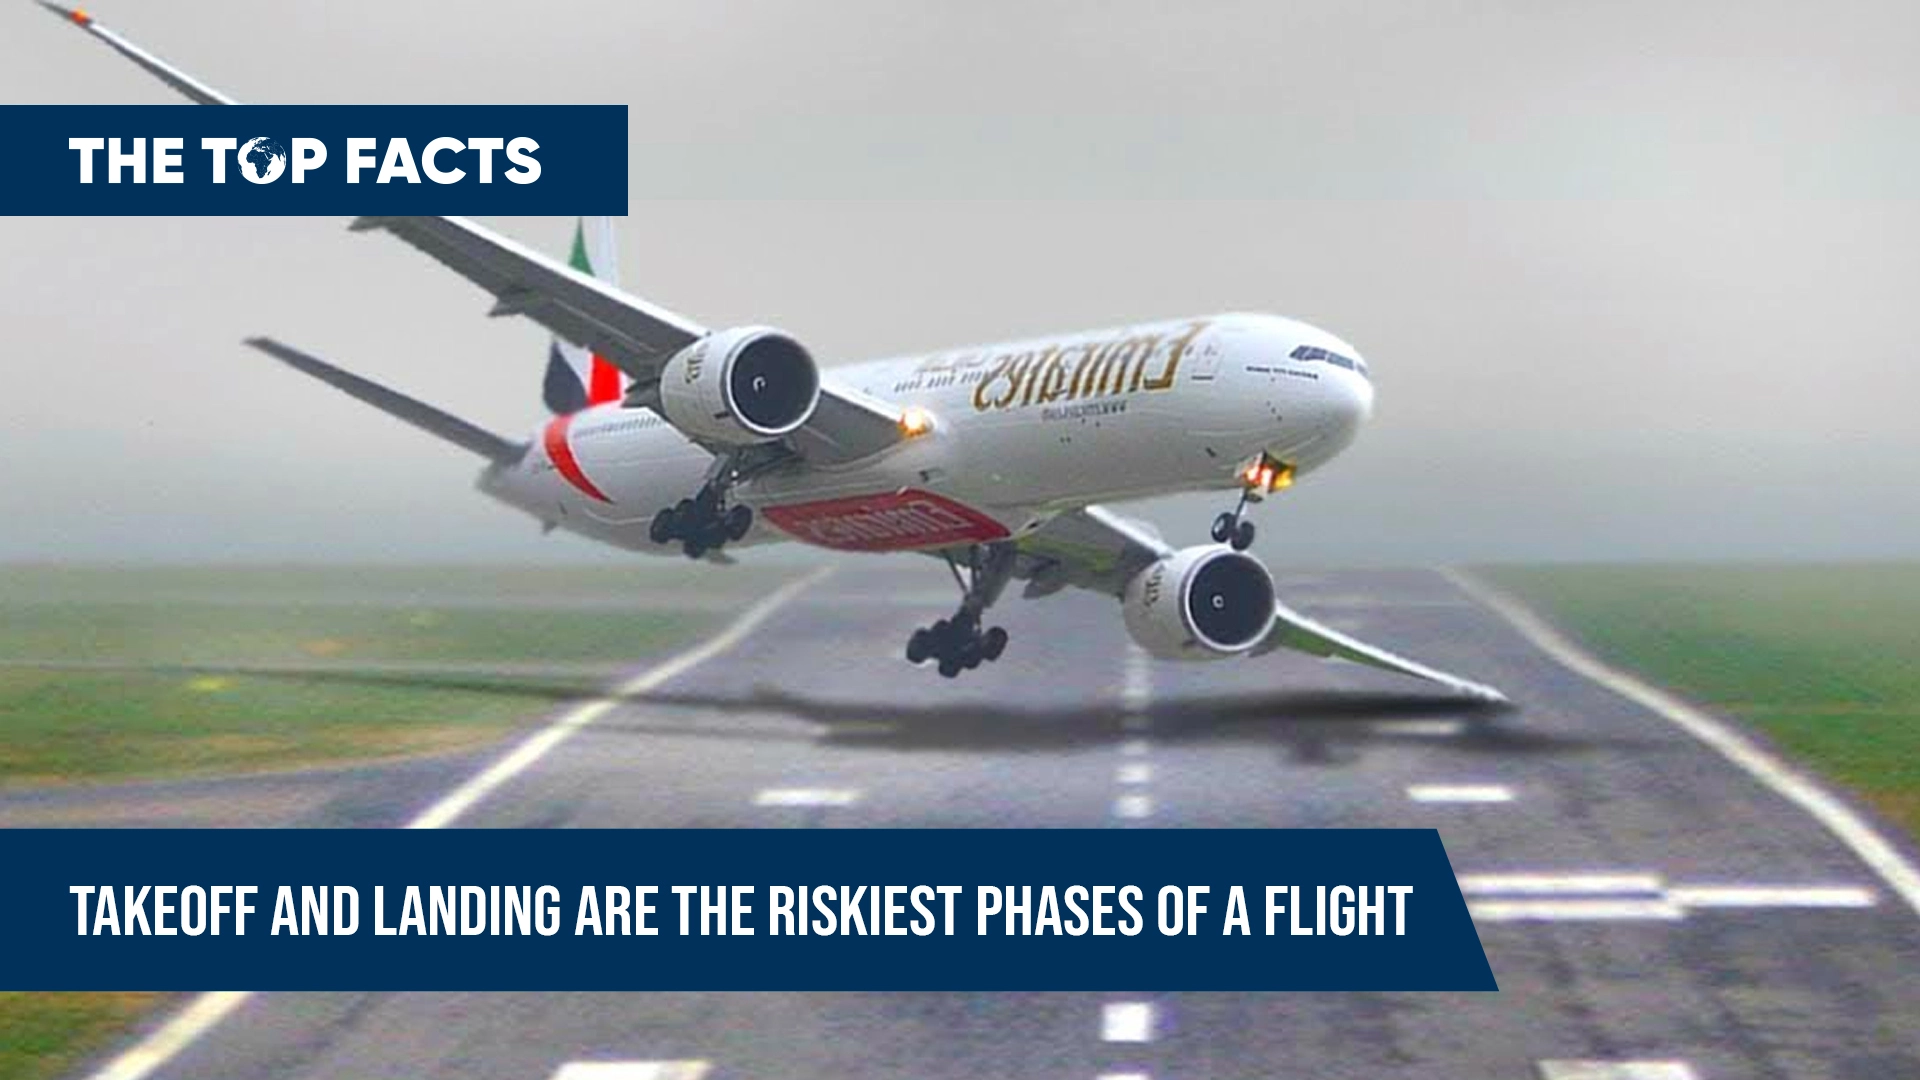 Takeoff and landing are the riskiest phases of a flight